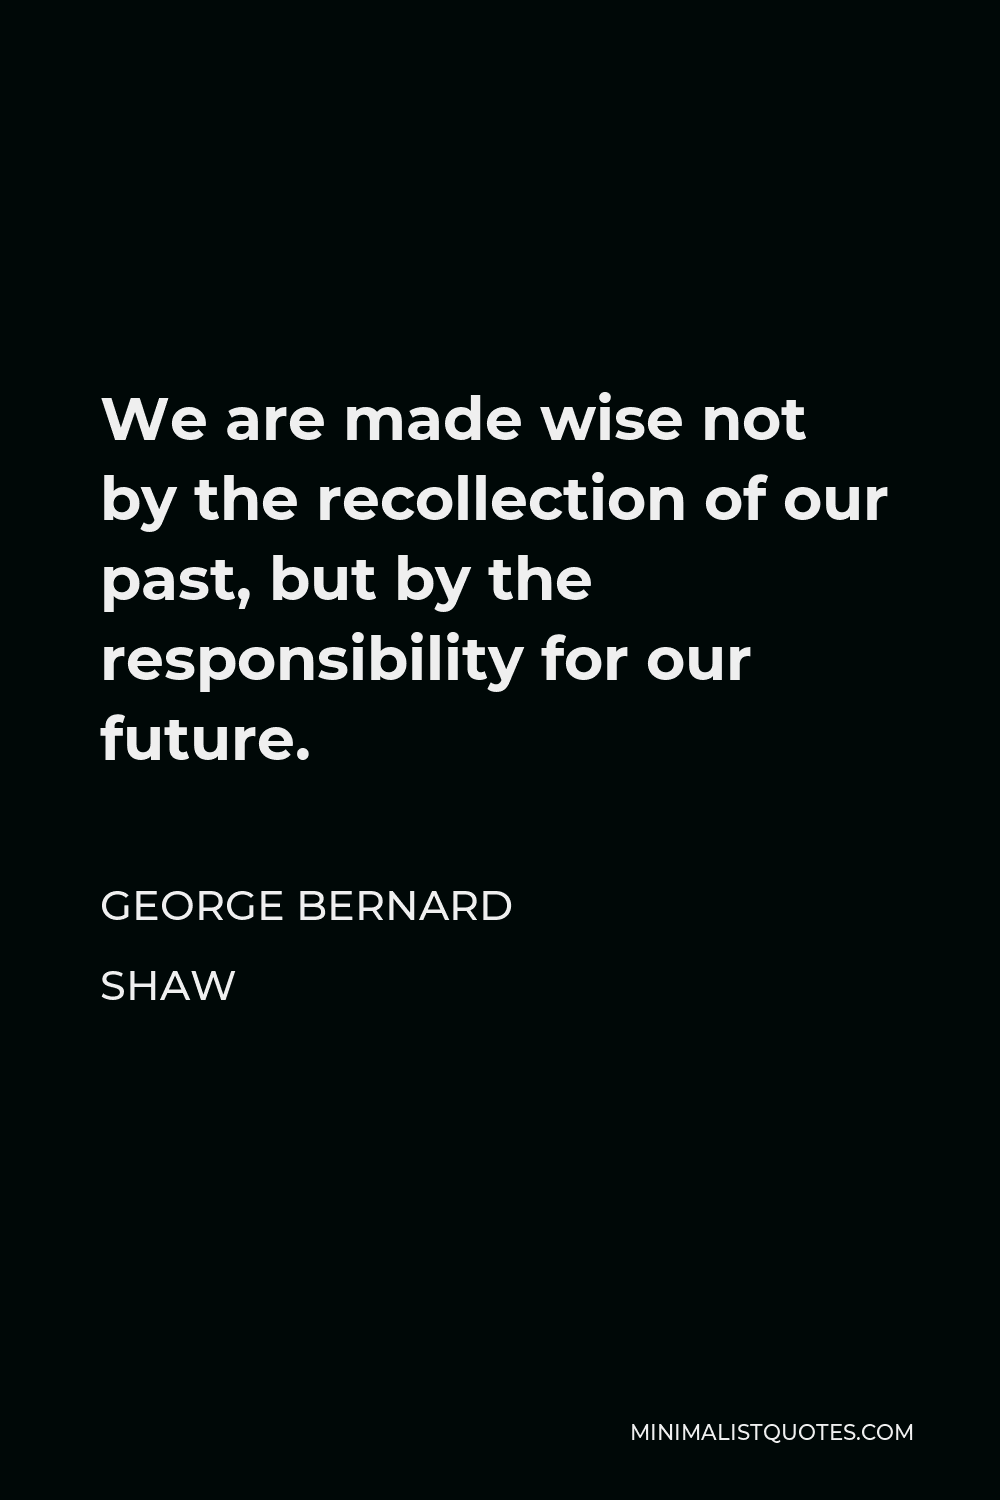 George Bernard Shaw Quote - We are made wise not by the recollection of our past, but by the responsibility for our future.